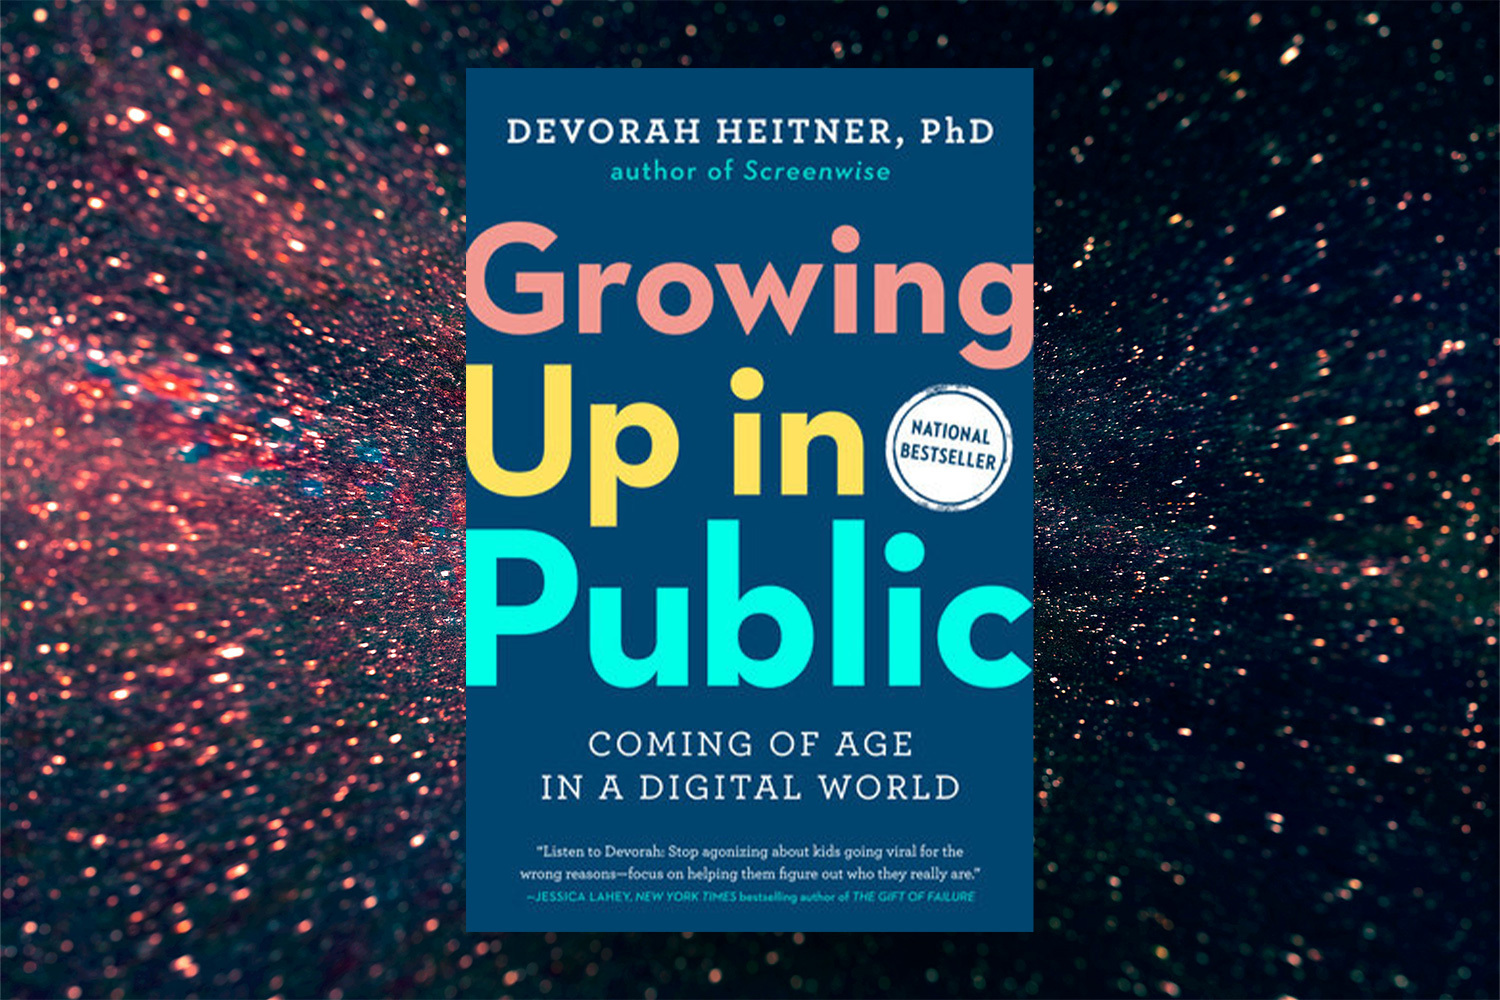 The cover of a new book "Growing Up in Public," written by Devorah Heitner, PhD. We spoke with Heitner about raising kids in the age of social media.